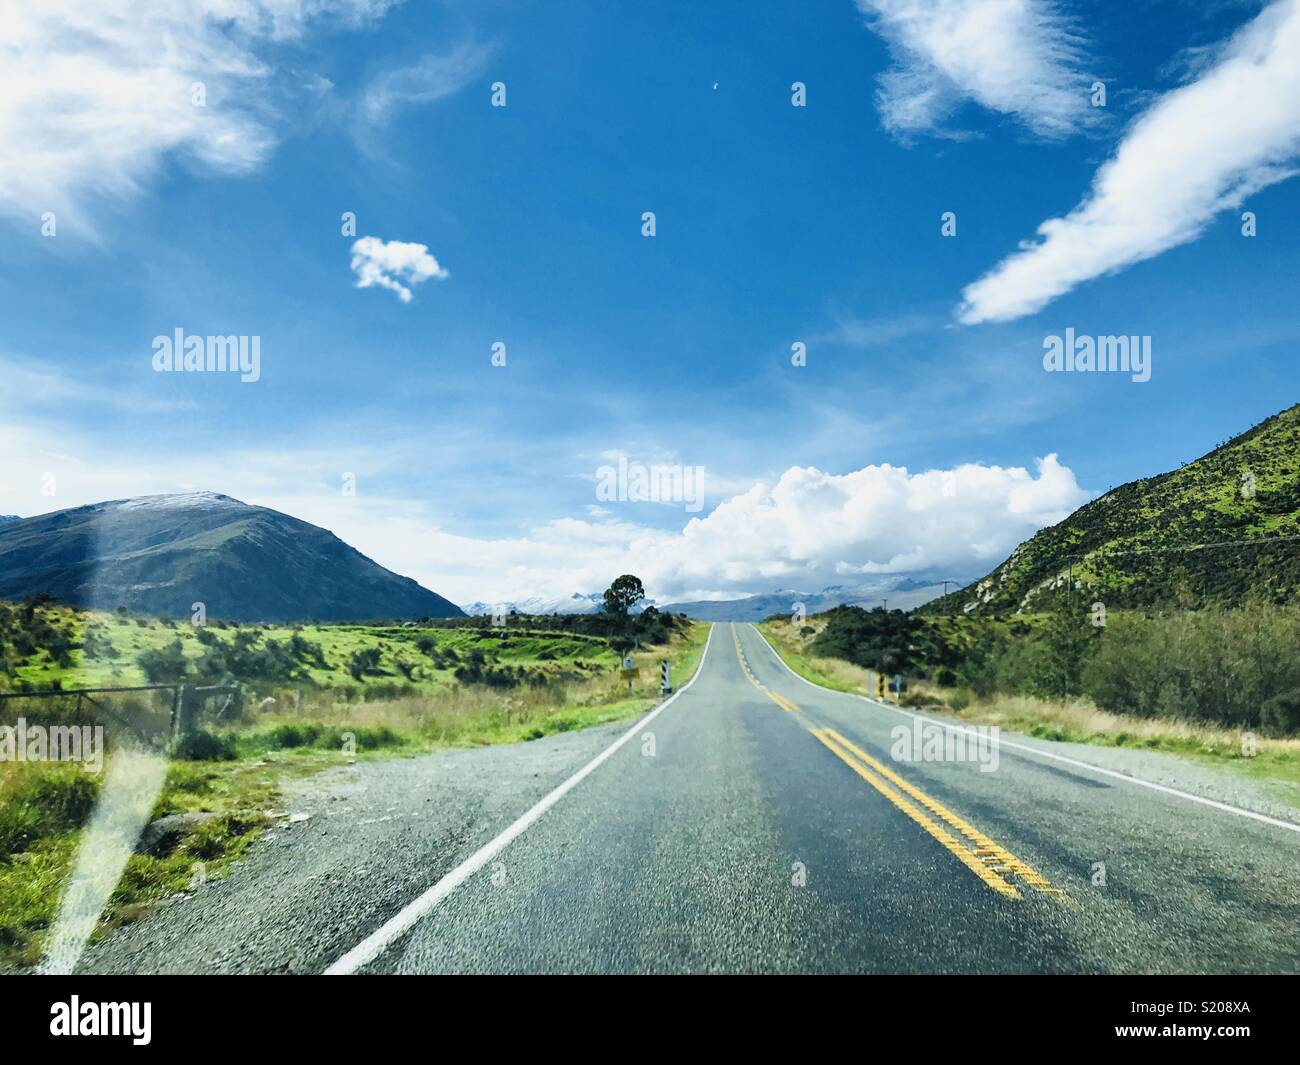 Endless Road, On the Way to Queenstown, South Island, New Zealand Stock Photo